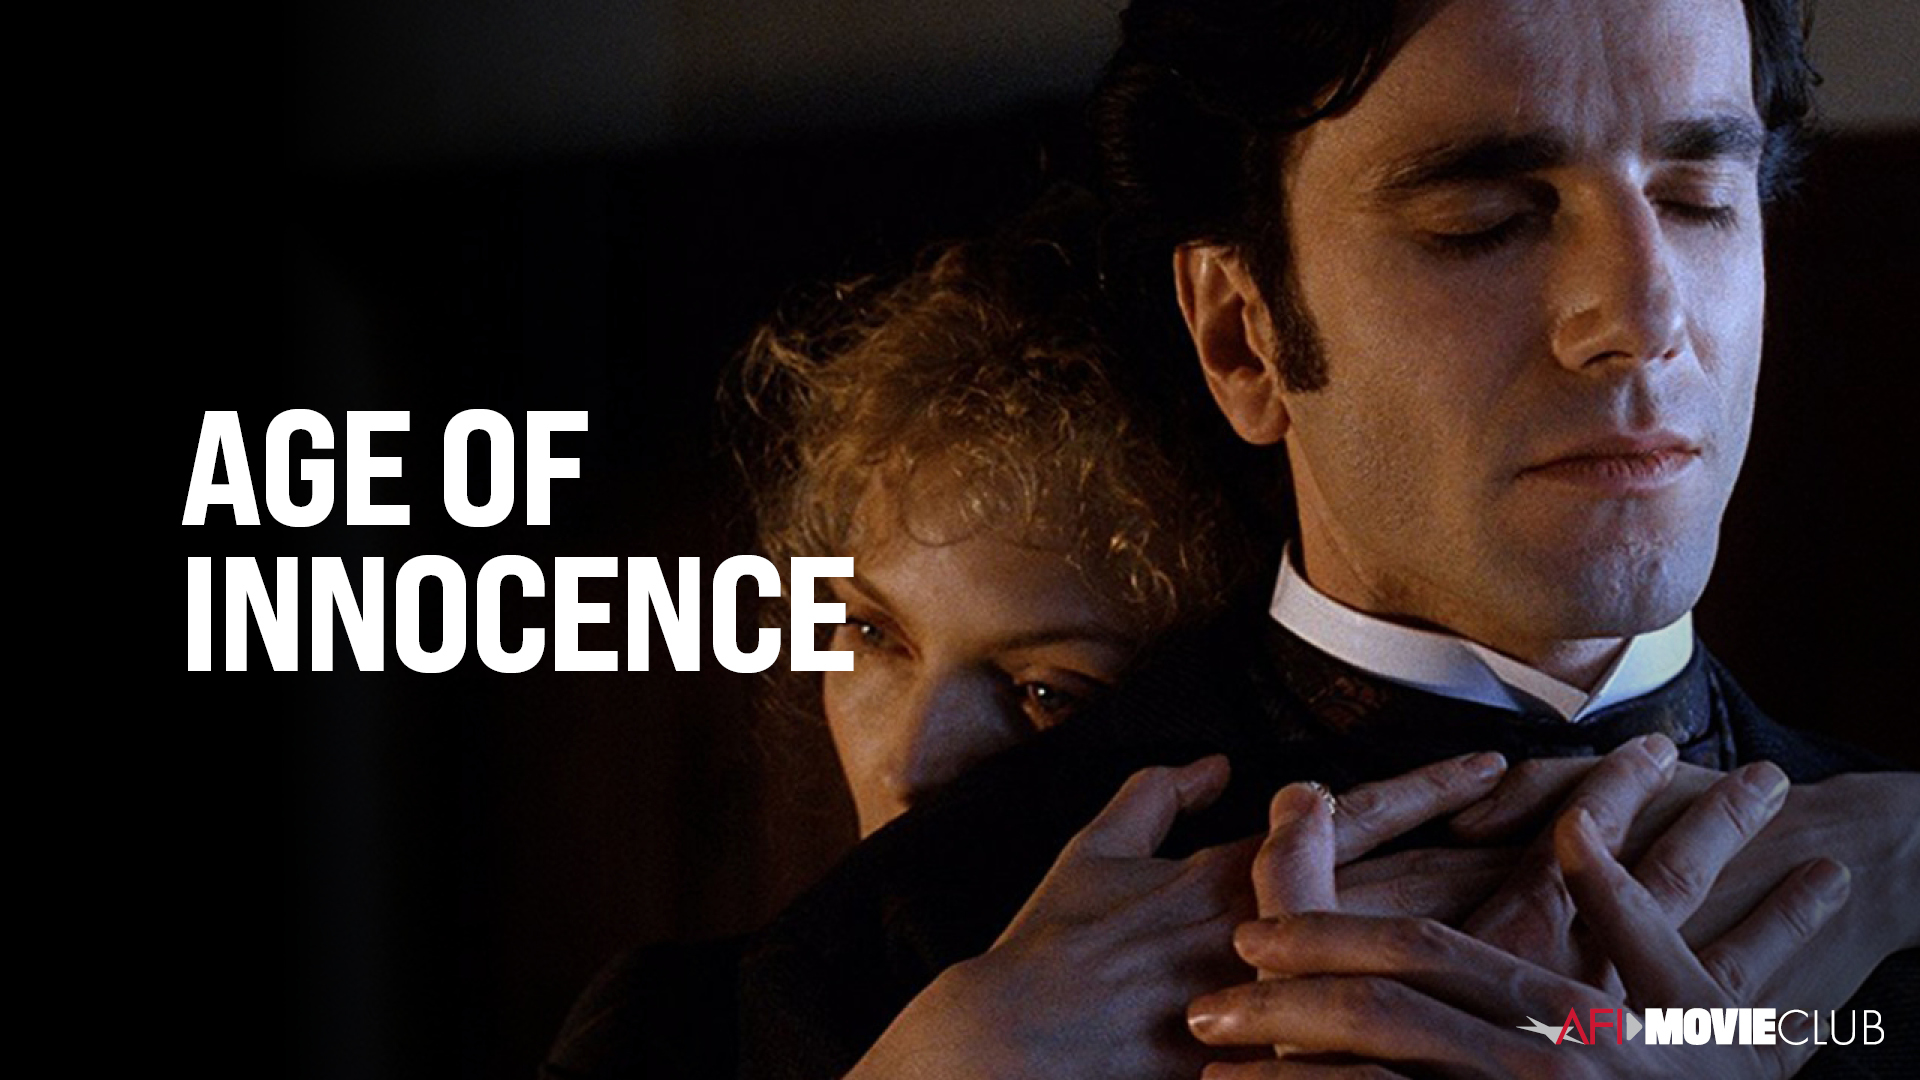 Age of Innocence Film Still - Michelle Pfeiffer and Daniel Day-Lewis